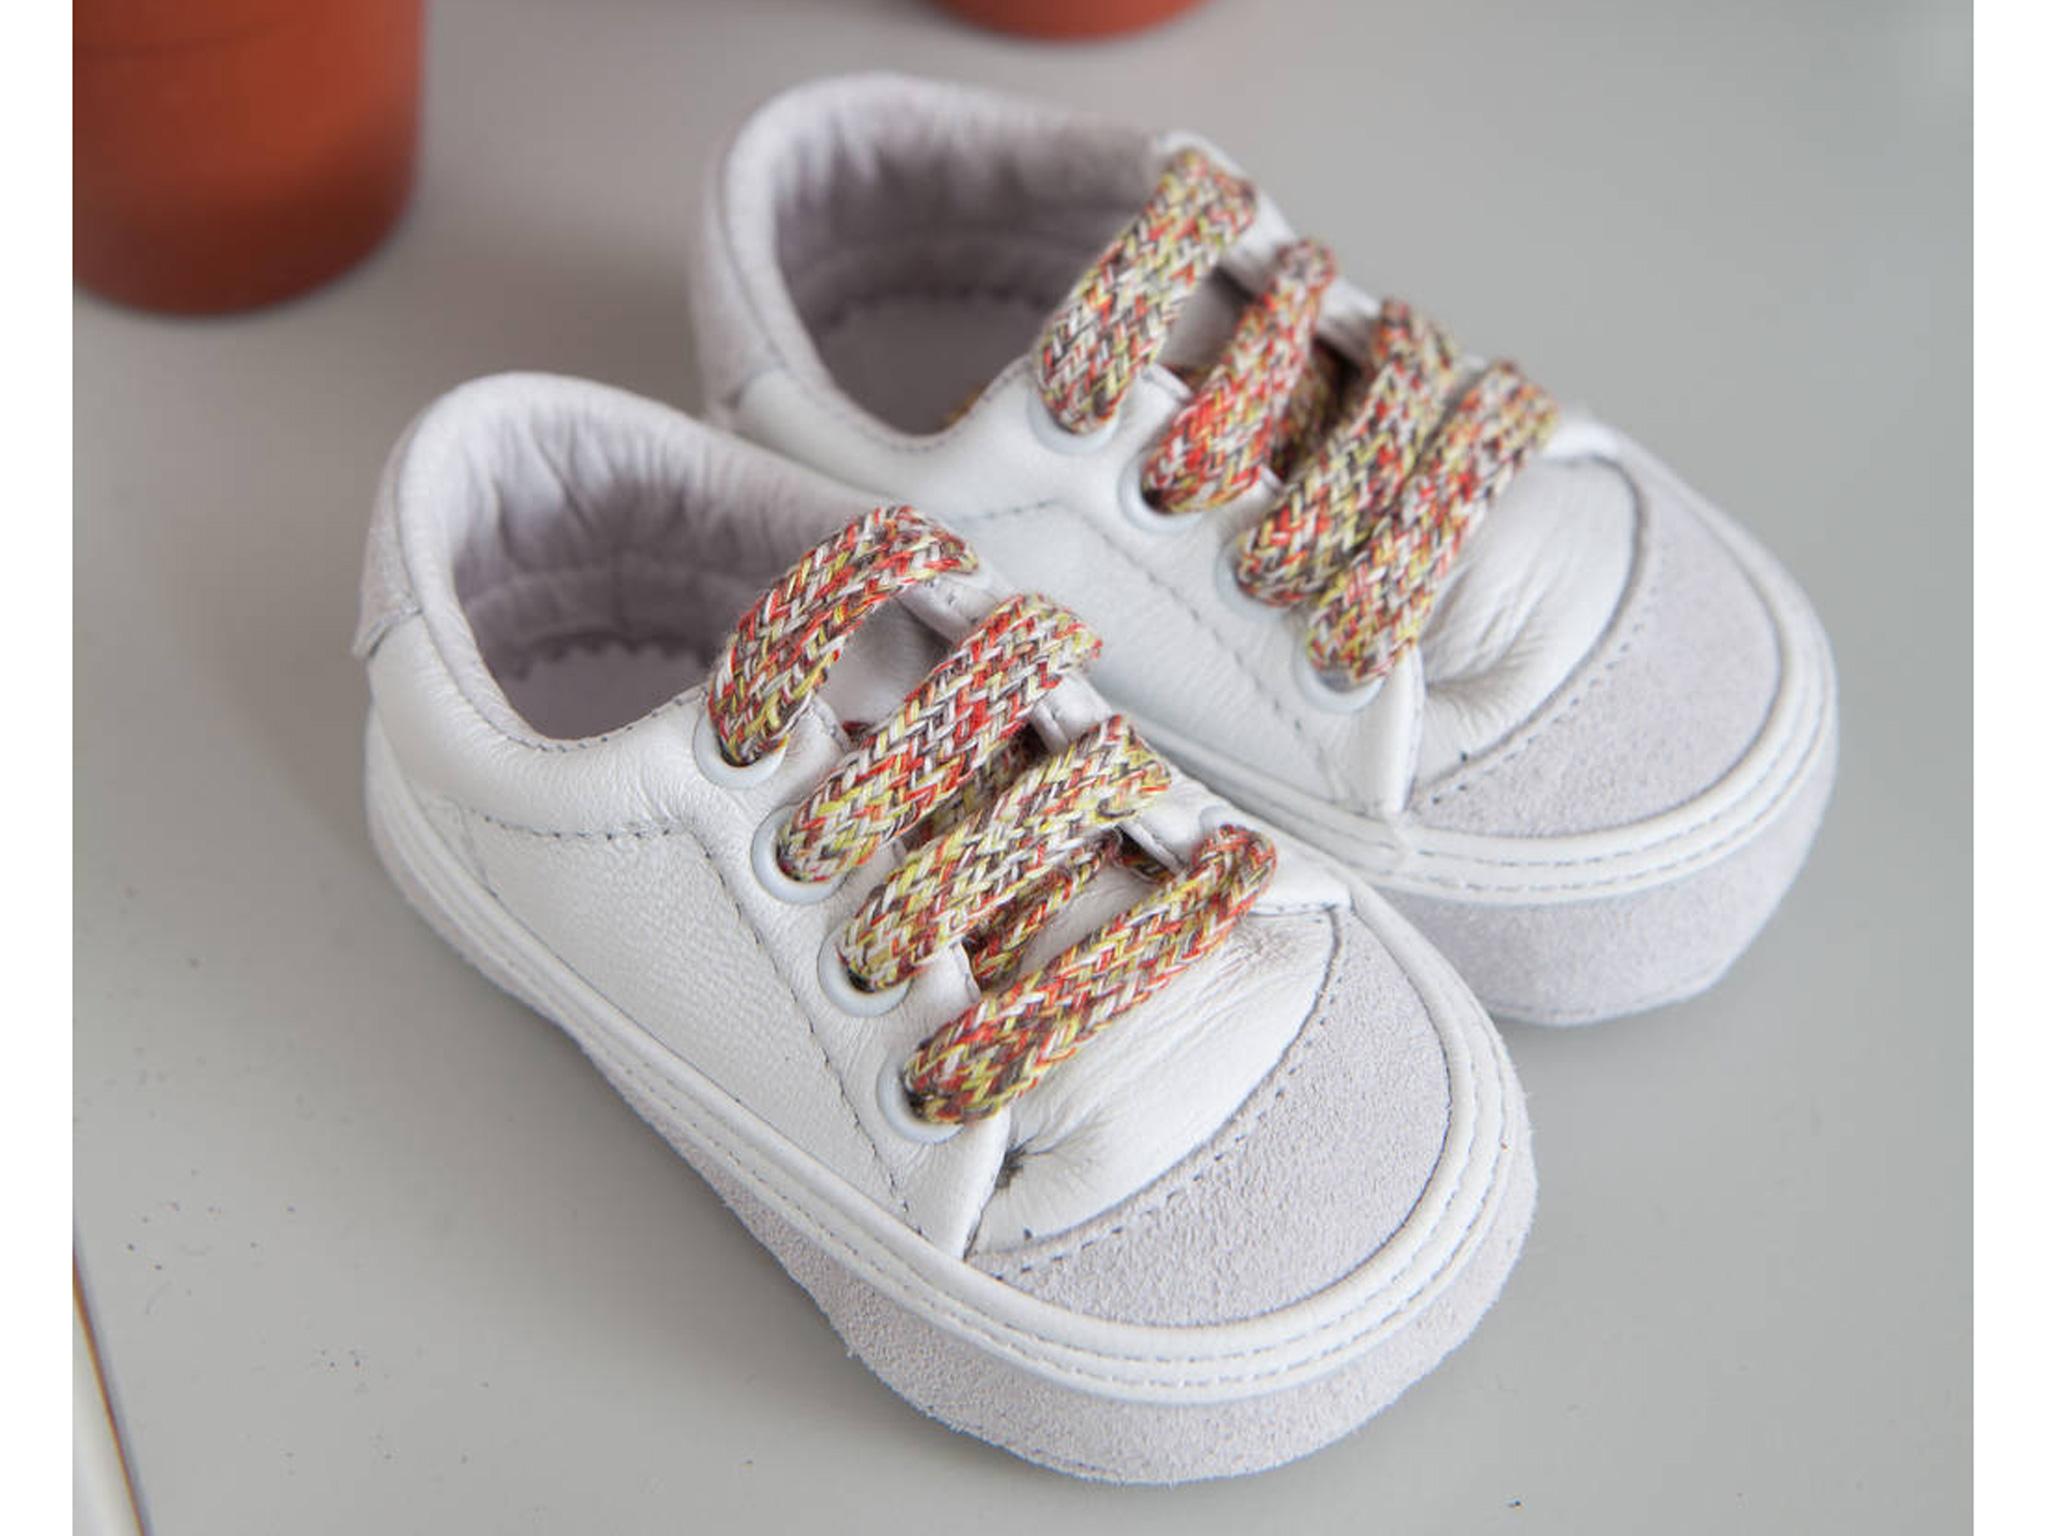 14 best baby trainers | The Independent 